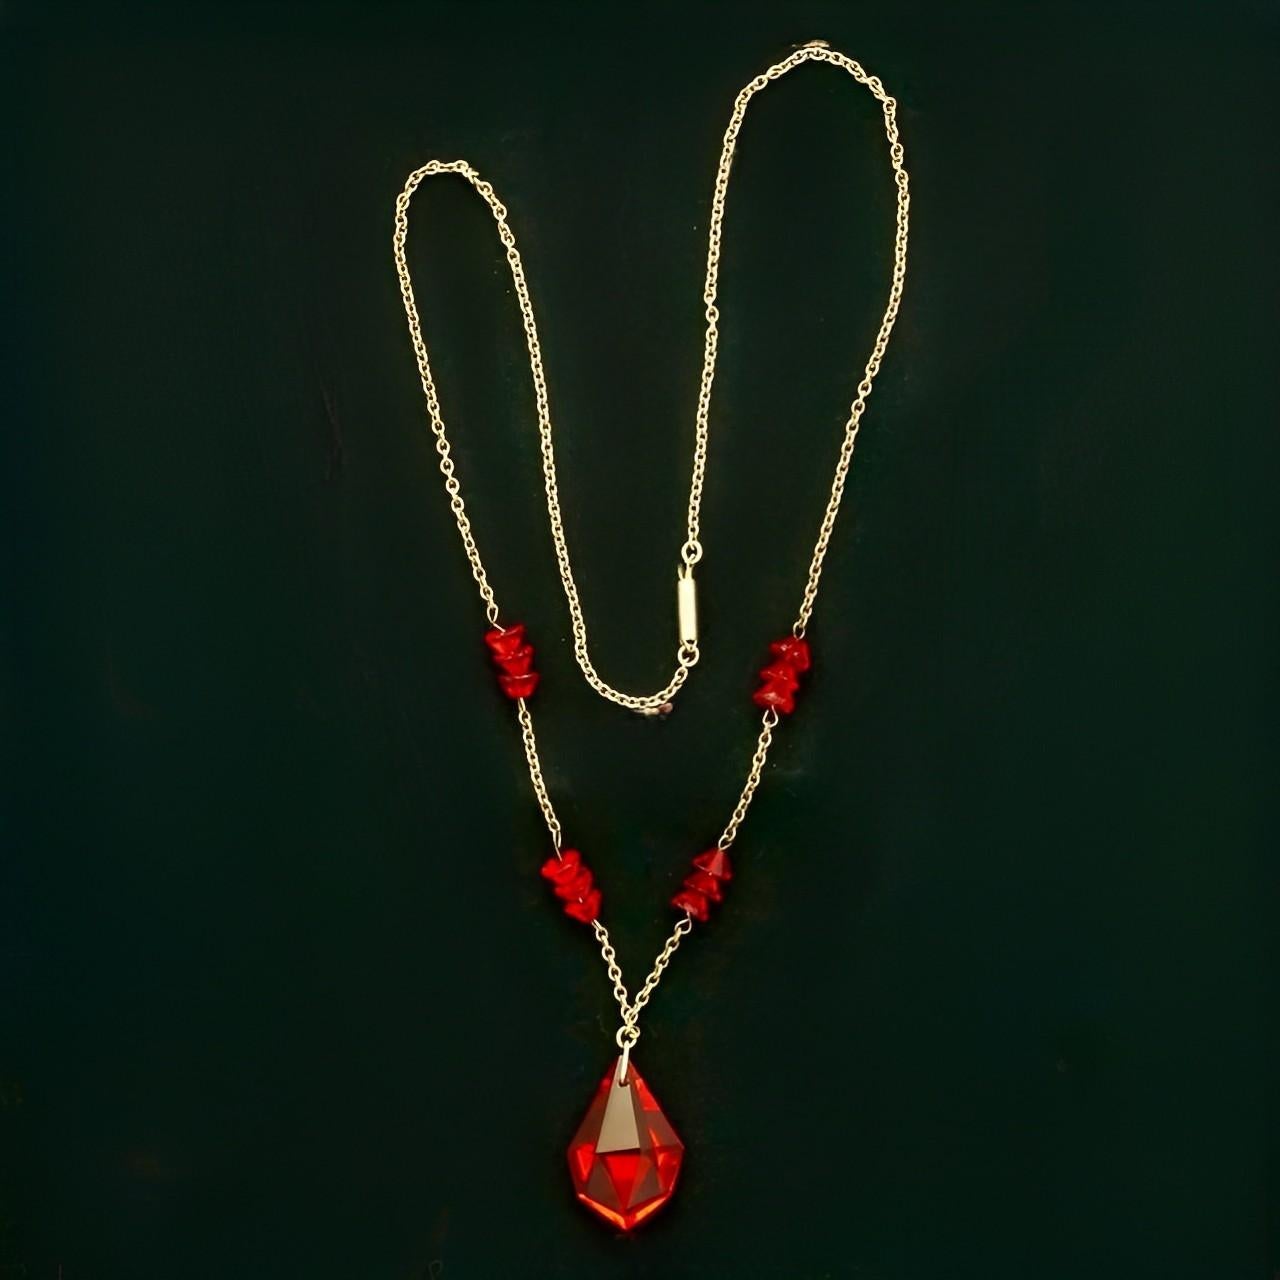 Art Deco Silver Tone Drop Pendant Necklace with Red Glass Crystals For Sale 1